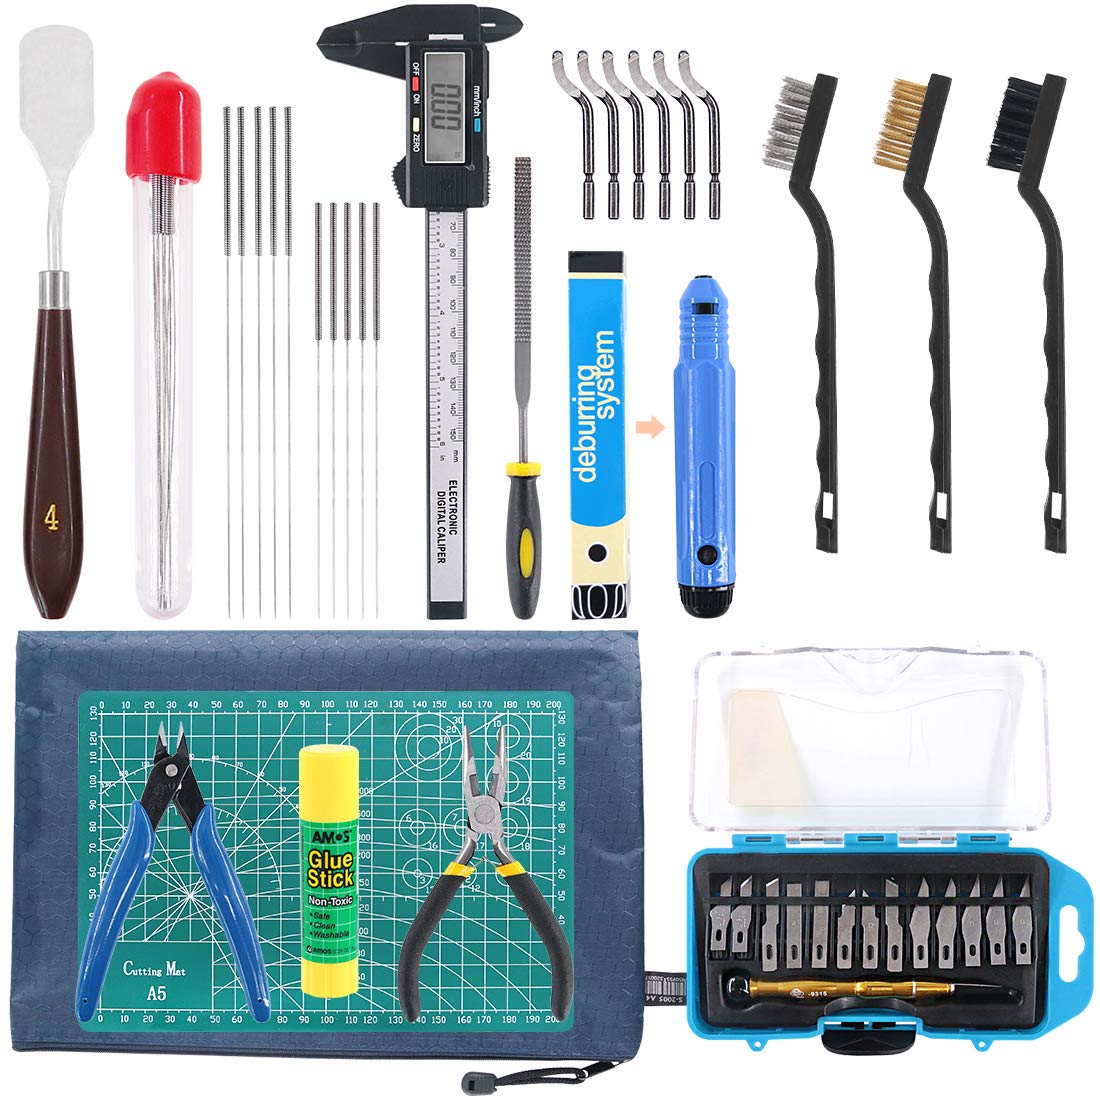 rustark-42-piece-3d-print-tool-kit-includes-debur-tool-cleaning-and-removal-tool-with-storage-bag-3d-printer-tool-set-fo Rustark 42 Piece 3D Print Tool Kit Review